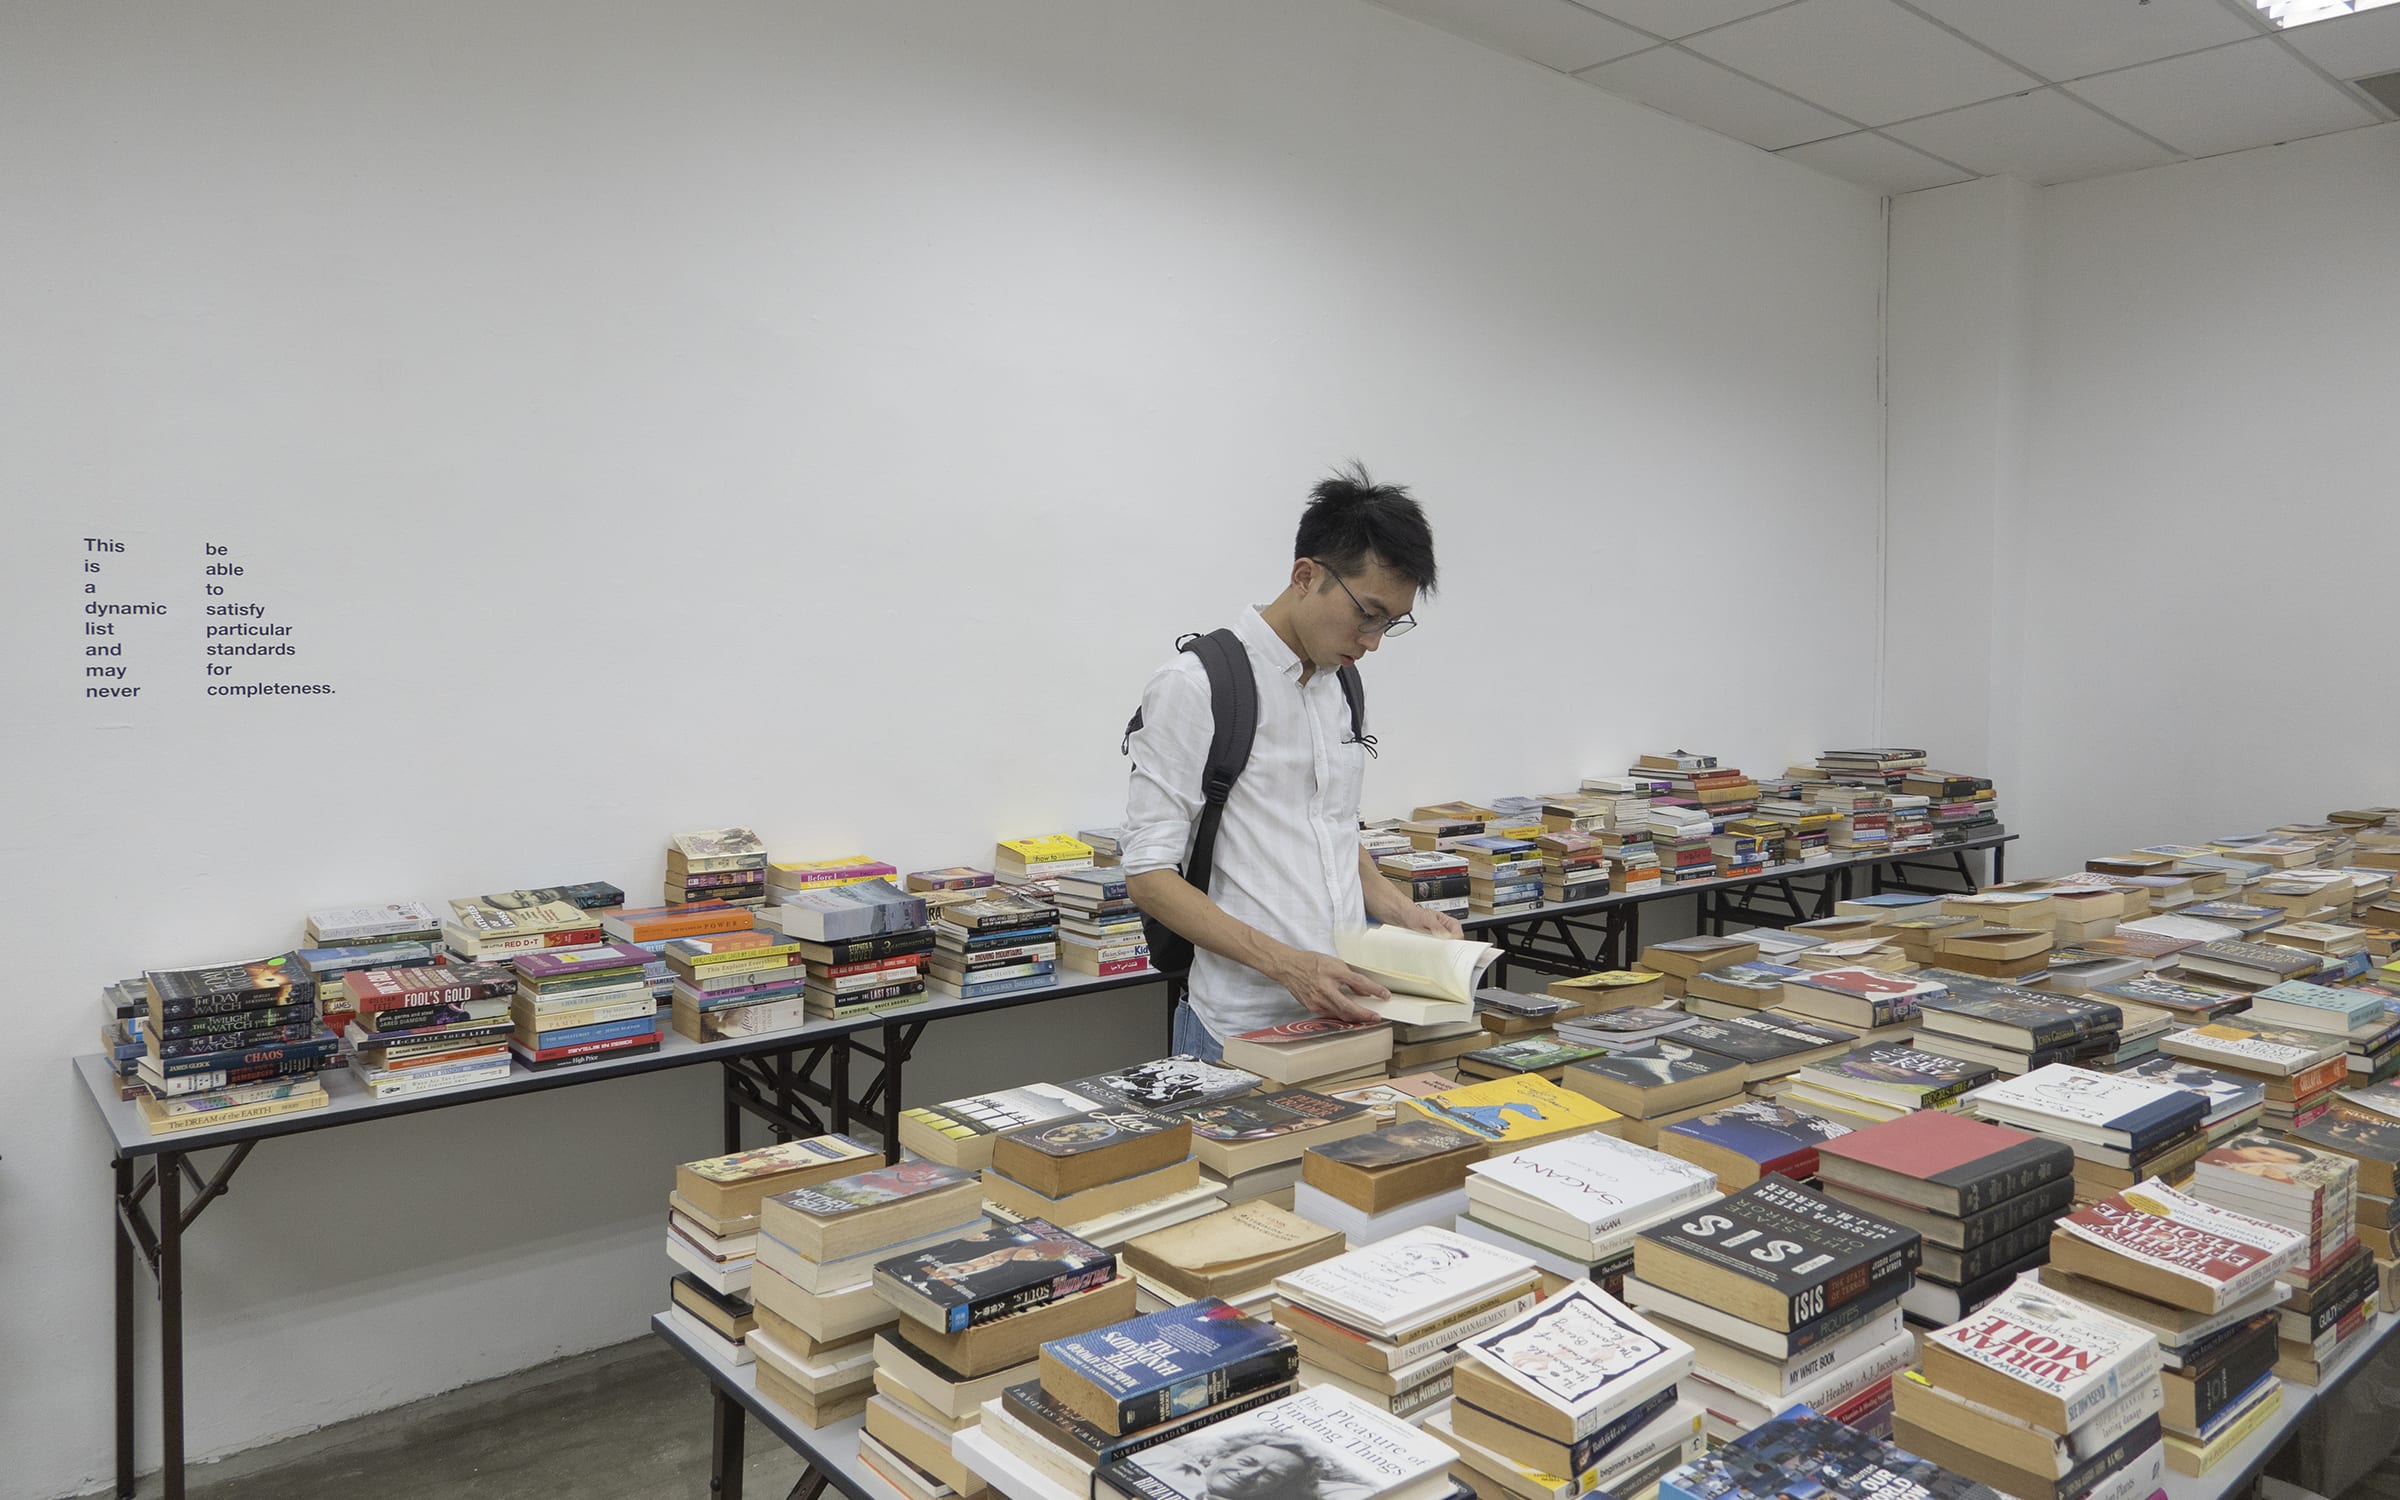 Heman Chong, The Library of Unread Books, 2016 - Ongoing. © Heman Chong / STPI. Photo courtesy of the artist and STPI – Creative Workshop & Gallery.